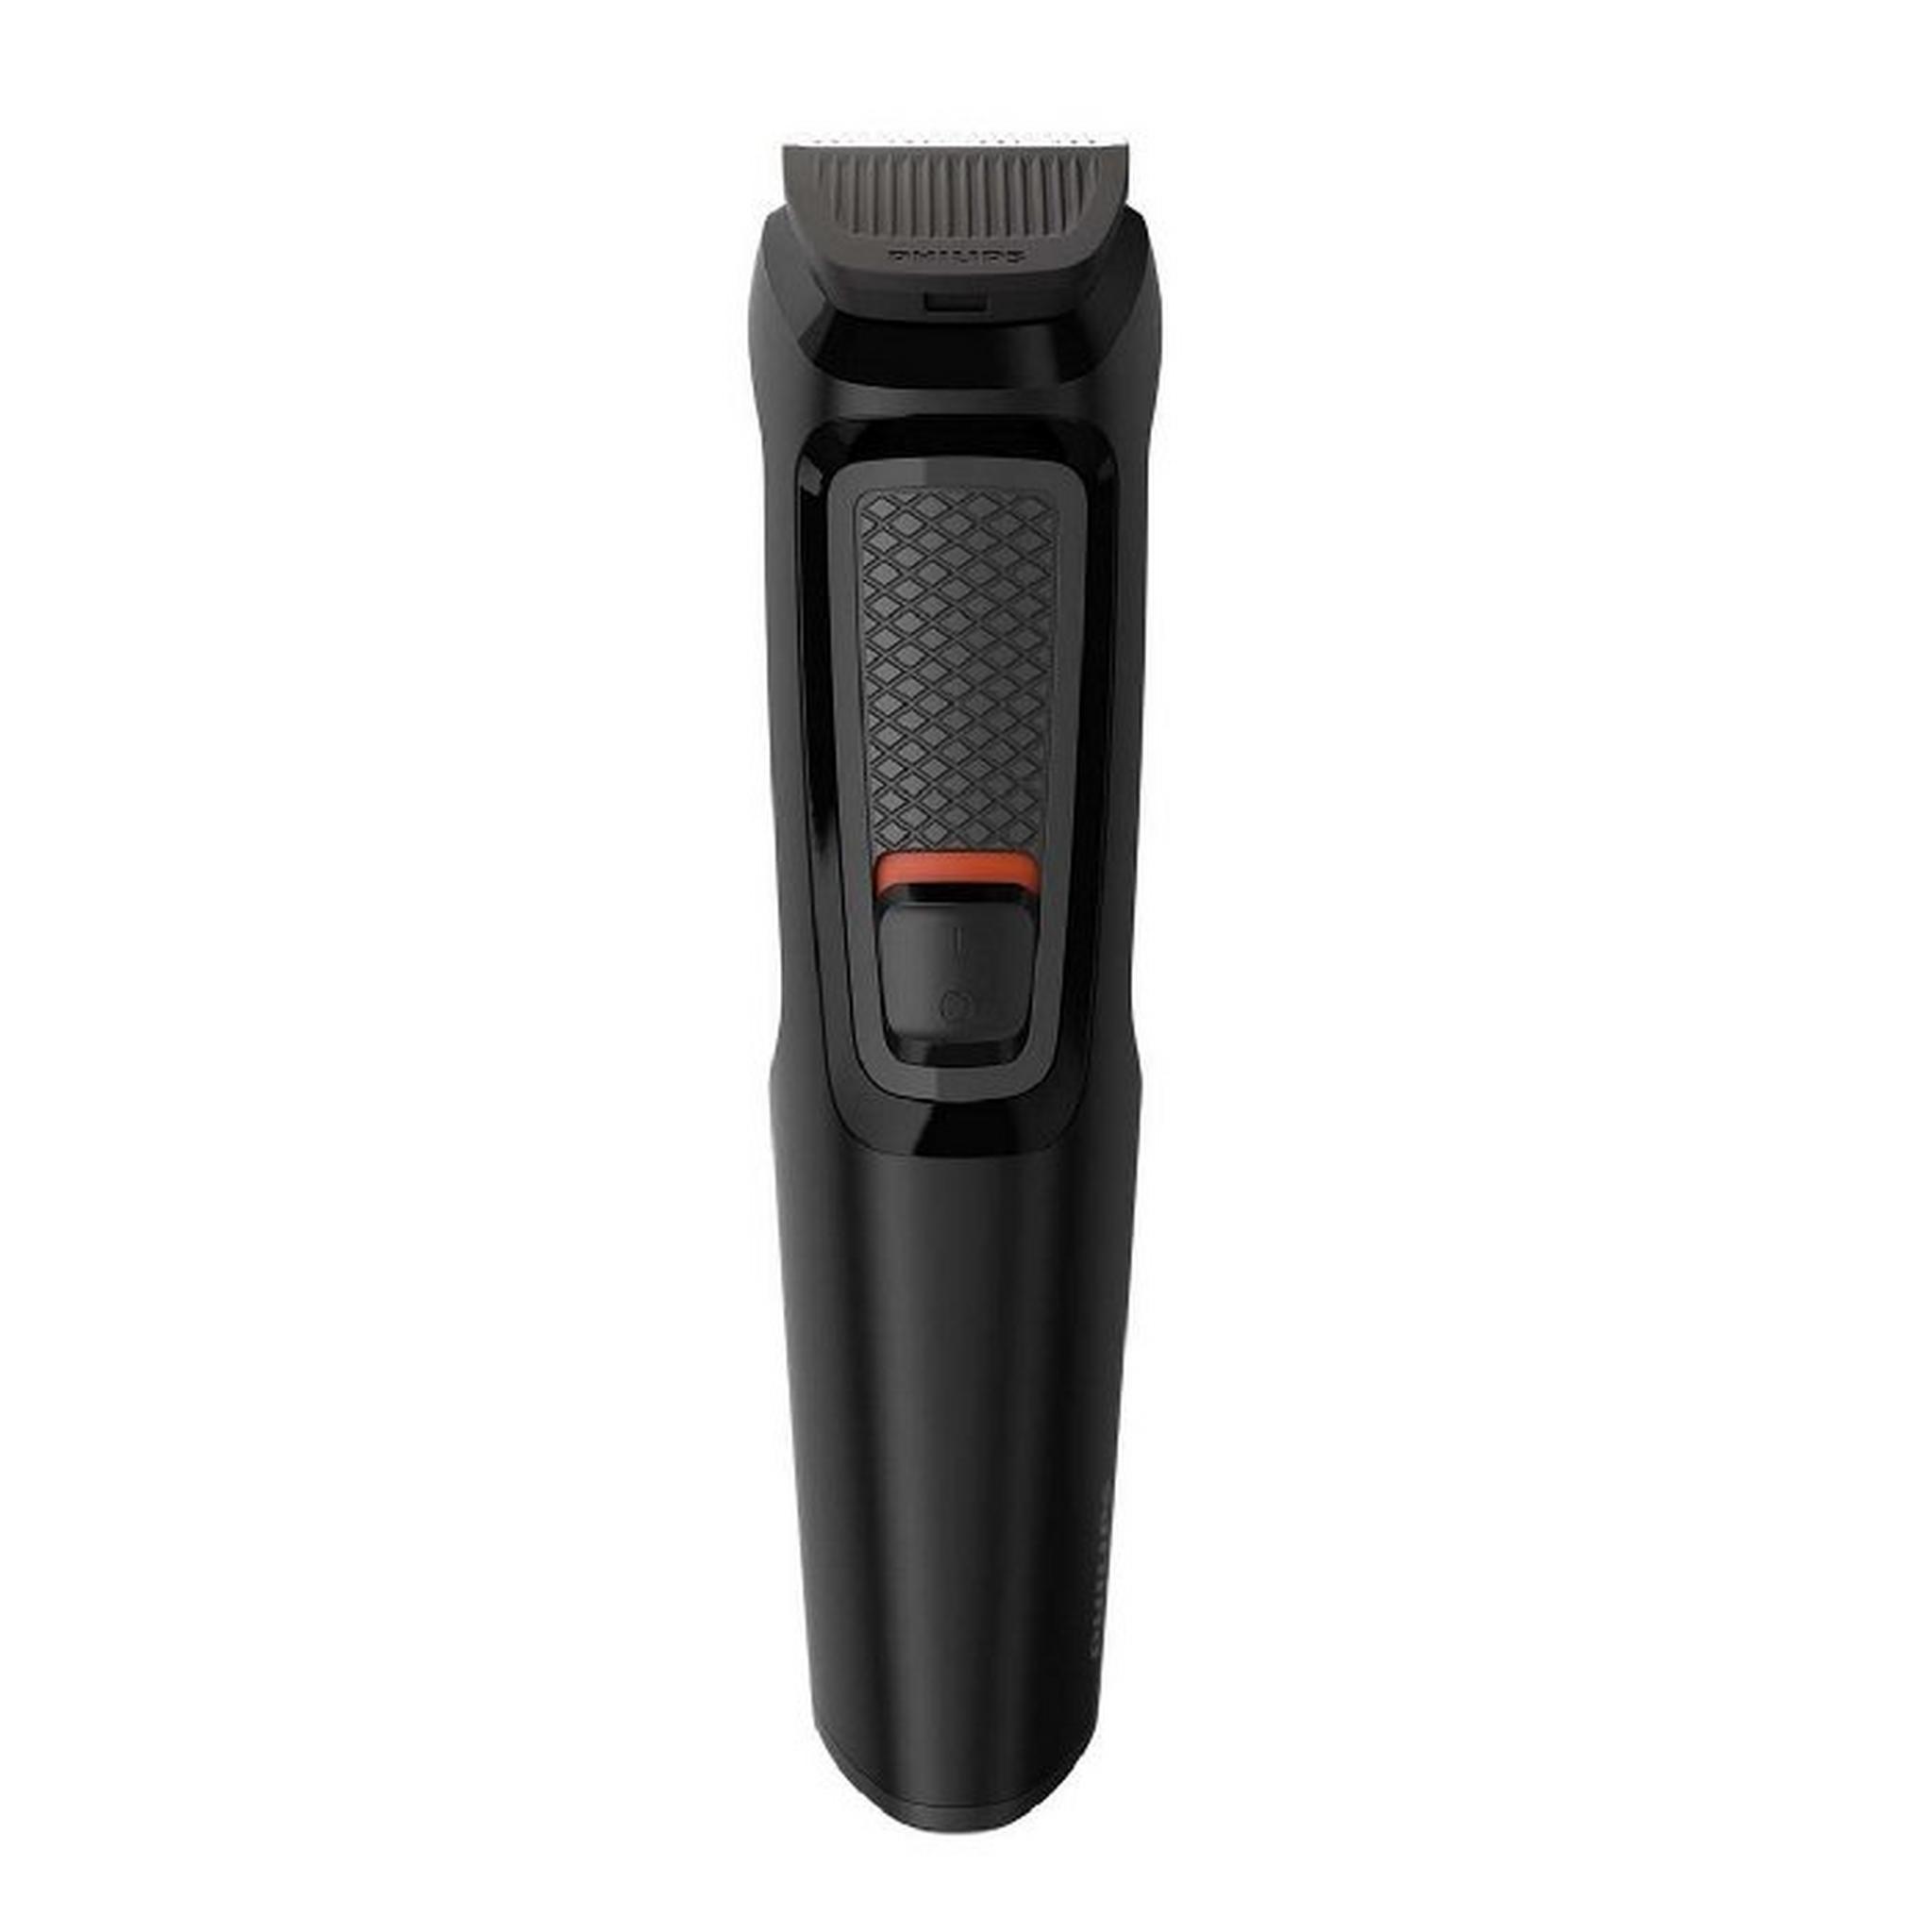 Philips 6 in 1 Male Trimmer (MG3710/13) - Black